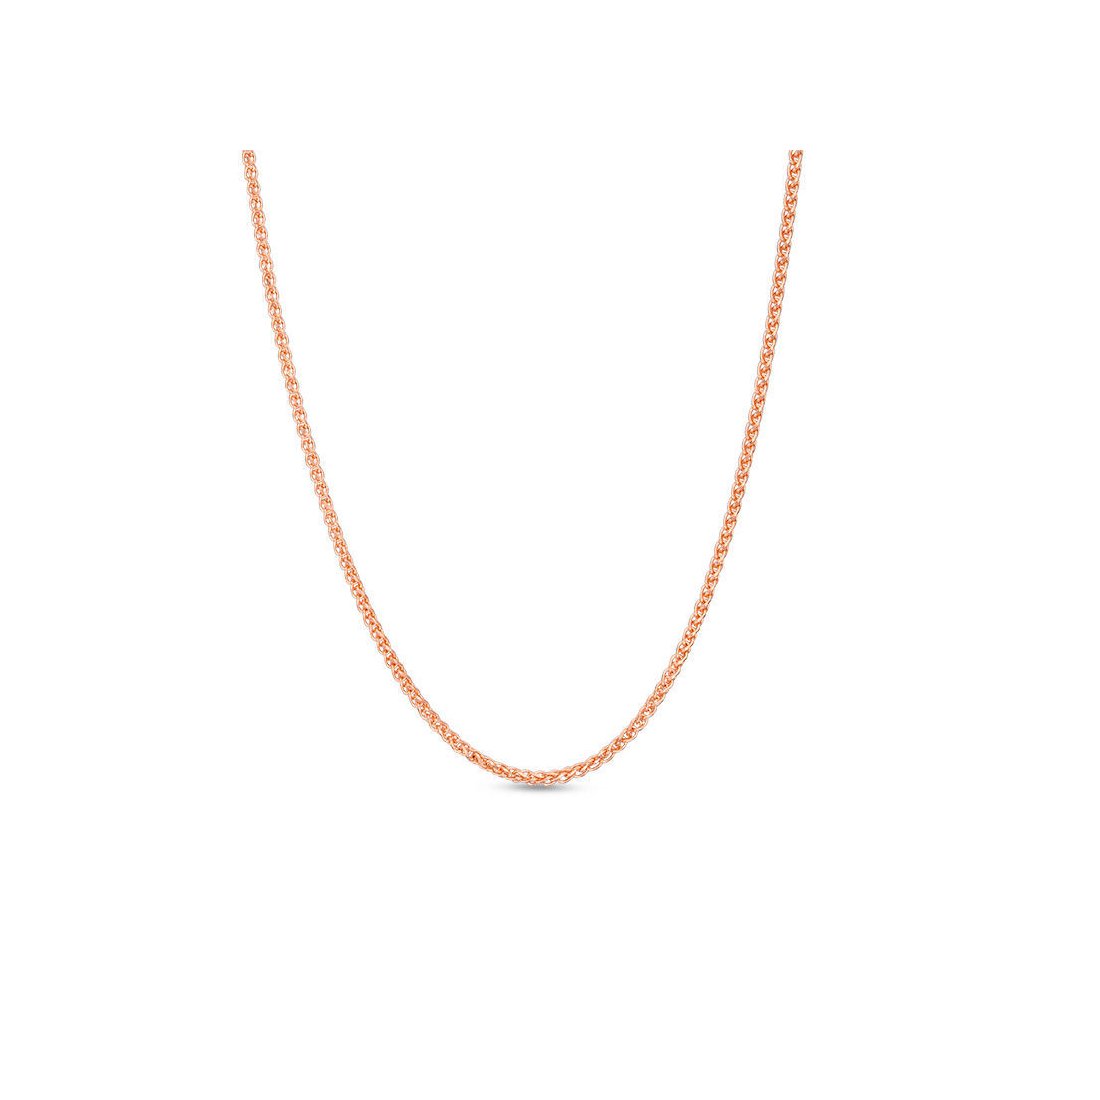 1.2MM 030 Rose Gold Wheat/Spiga Chain .925 Sterling Silver Length 7"-24" Inches